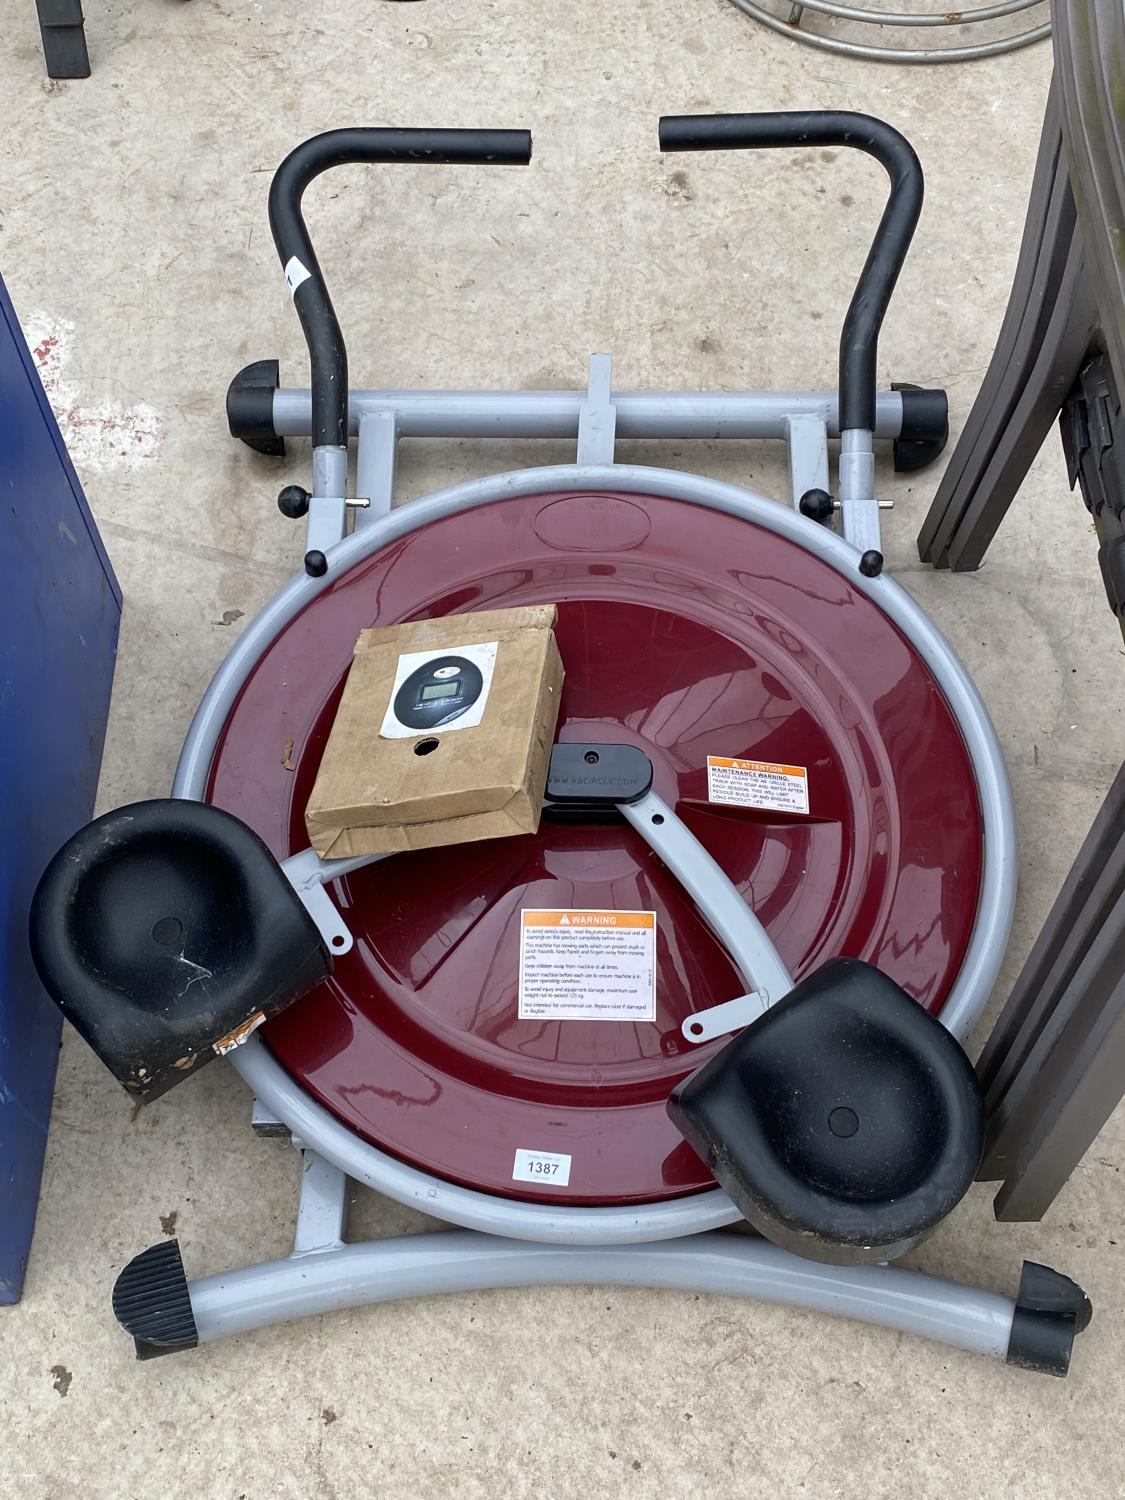 AN ABCIRCLE EXERCISE MACHINE